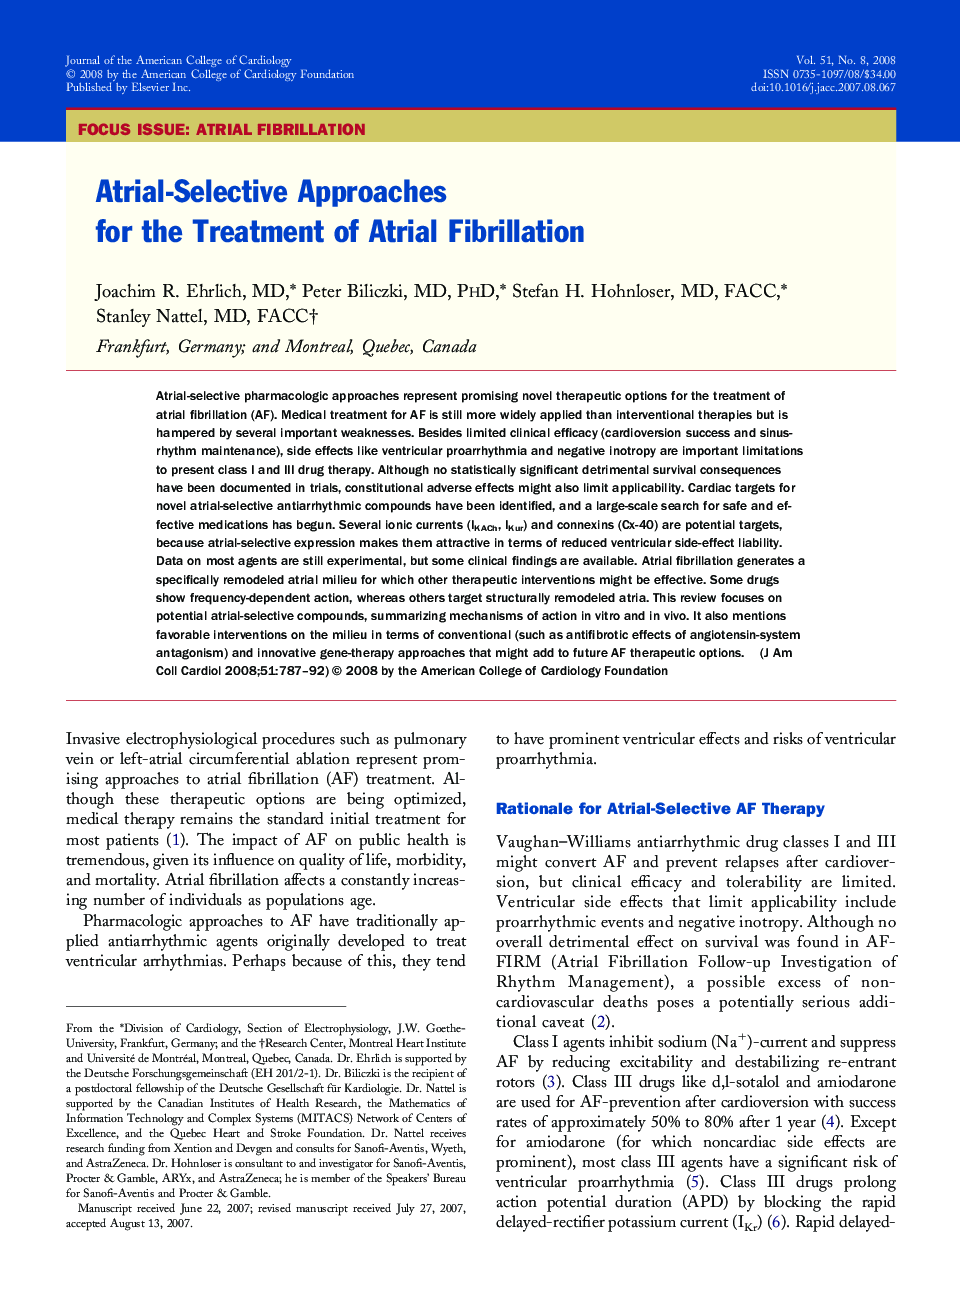 Atrial-Selective Approaches for the Treatment of Atrial Fibrillation